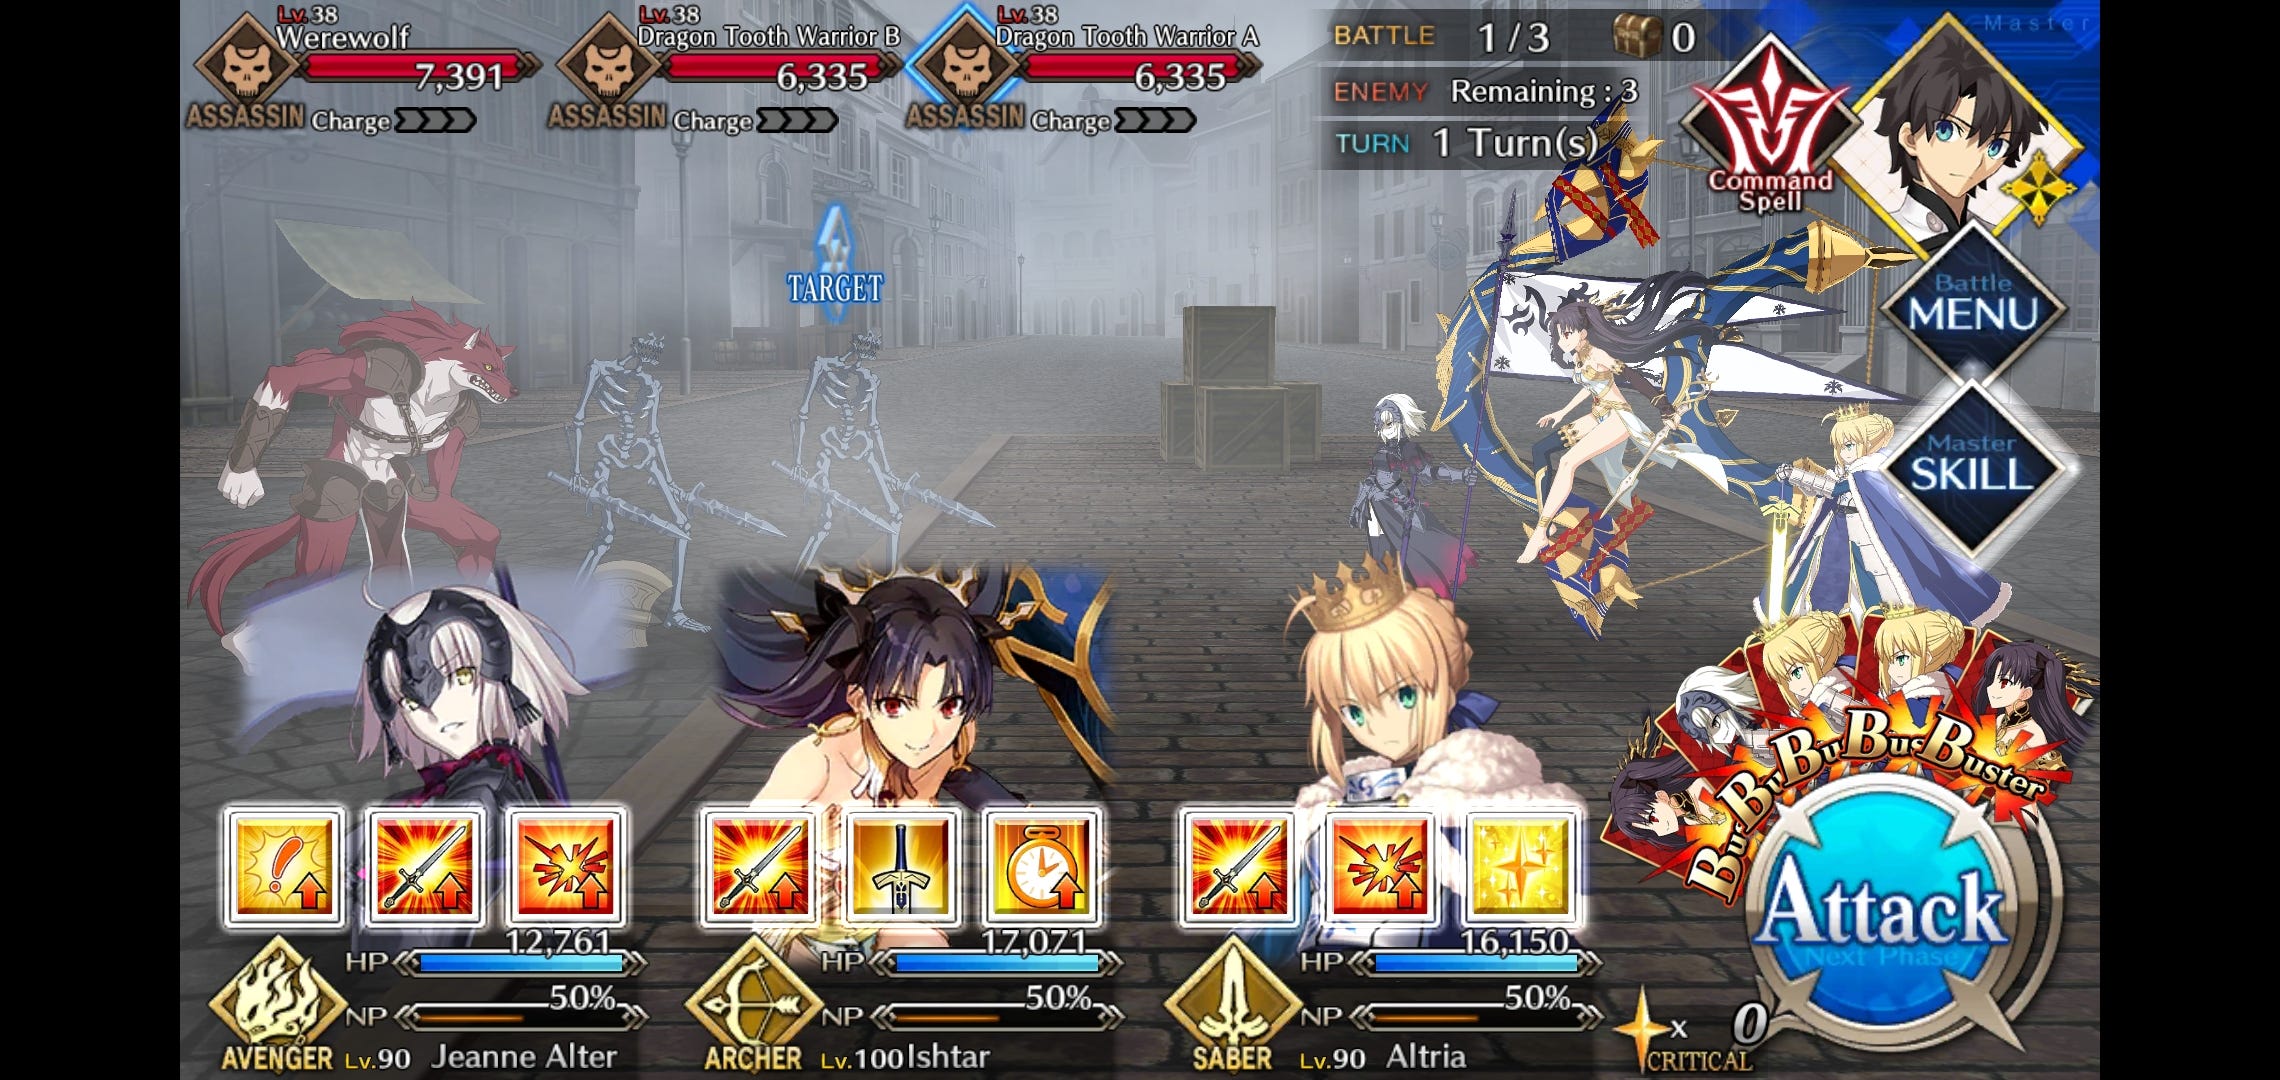 Pendragon Four Multi Agent Reinforcement Learning With Fate Grand Order By Michael Sugimura Towards Data Science